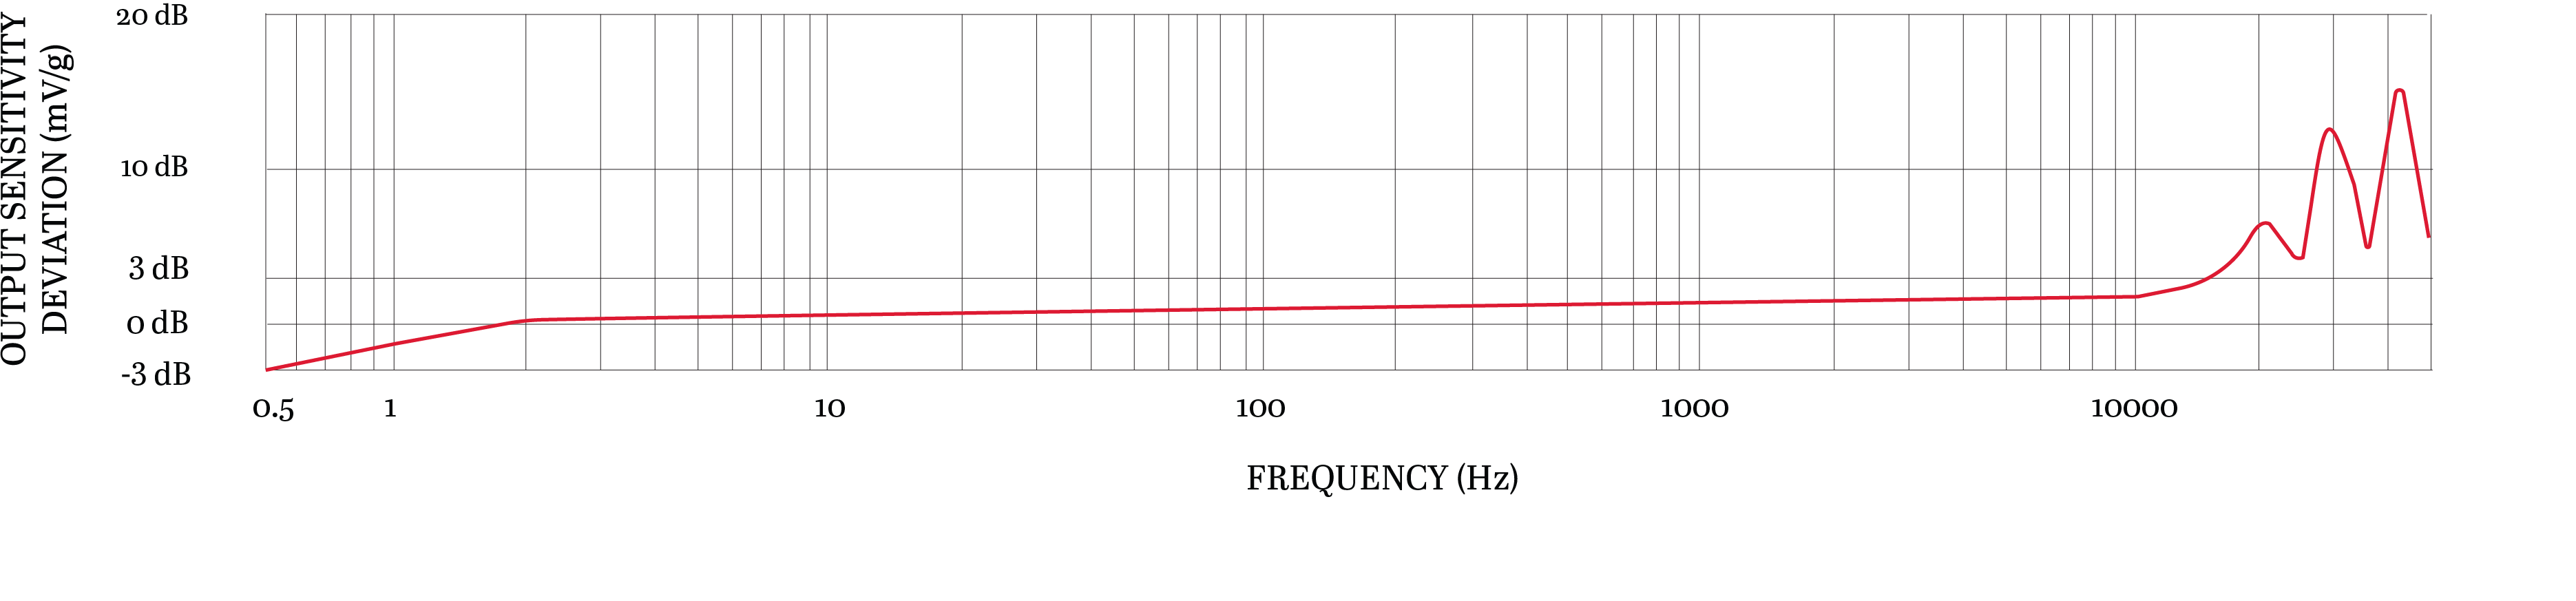 A line graph showing the frequency resopnse of a CTC UEA332 condition monitoring sensor.